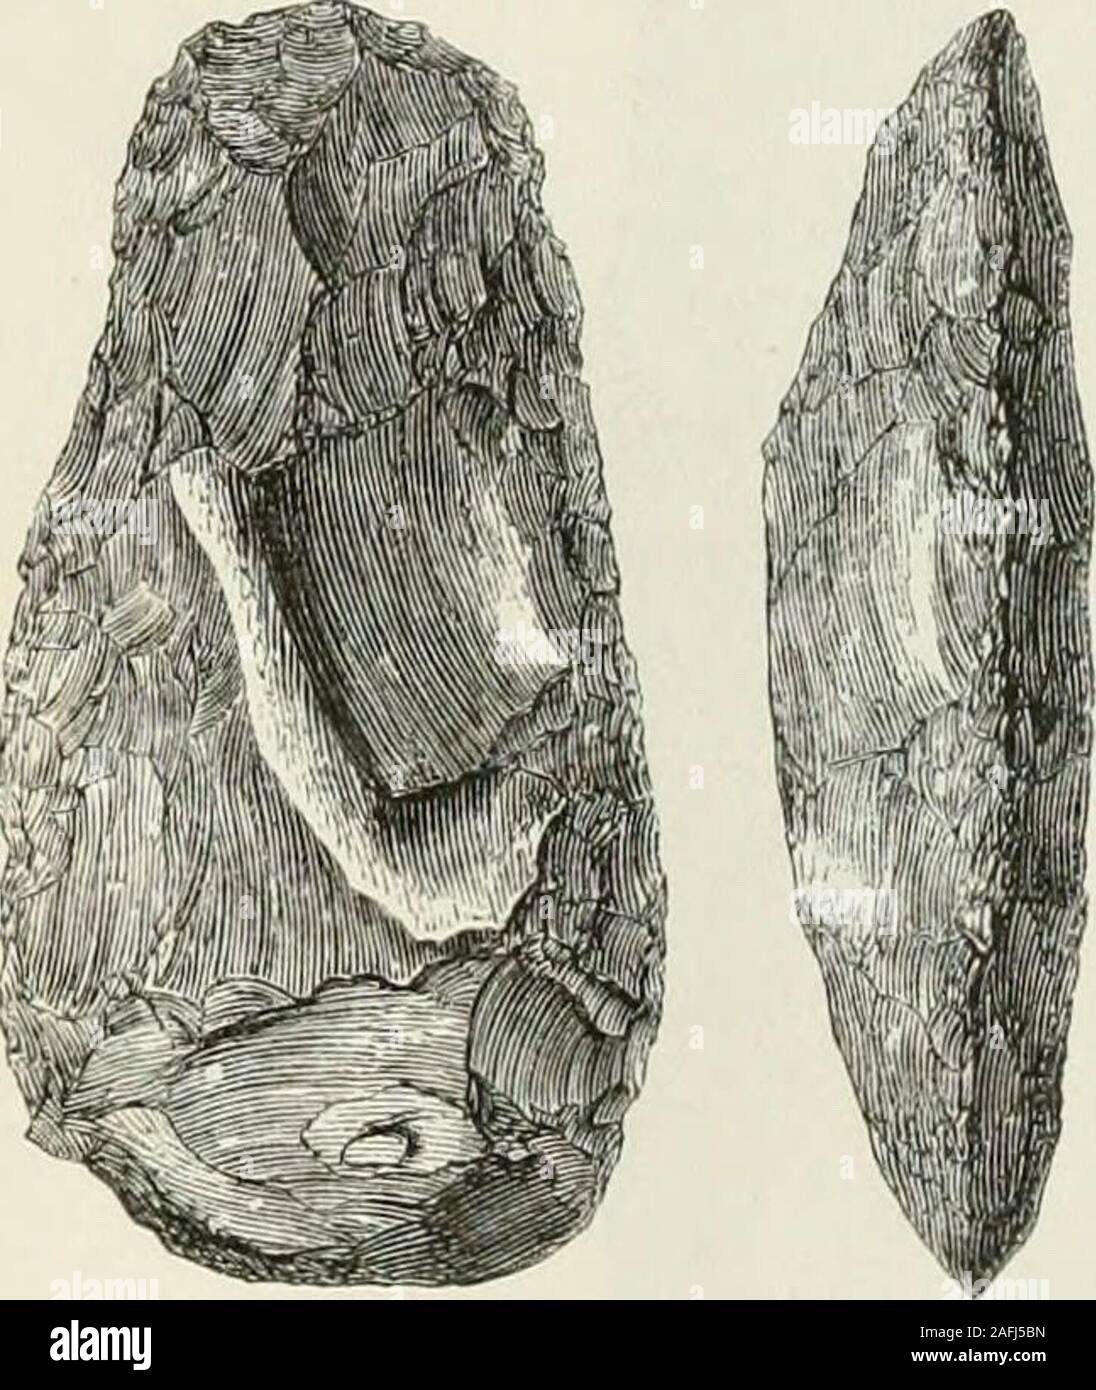 . The ancient stone implements, weapons, and ornaments, of Great Britain. other form, apparently intended for use as an adze, is also ofrare occurrence. The specimen given in Fig. 39 was found atGanton, Yorkshire, and is in my own collection. It is very muchmore convex on one face than the other, which indeed is nearlyflat. The grinding is confined to the edge, but some parts of theflat face are polished as if by friction. 86 CELTS GROUND AT THE EDGE ONLY, [chap. Dr. Jolin Stuart, F.S.A. Scot., lias shown me a sketch of a largeimplement of this type, and considerably bowed longitudinally,found Stock Photo